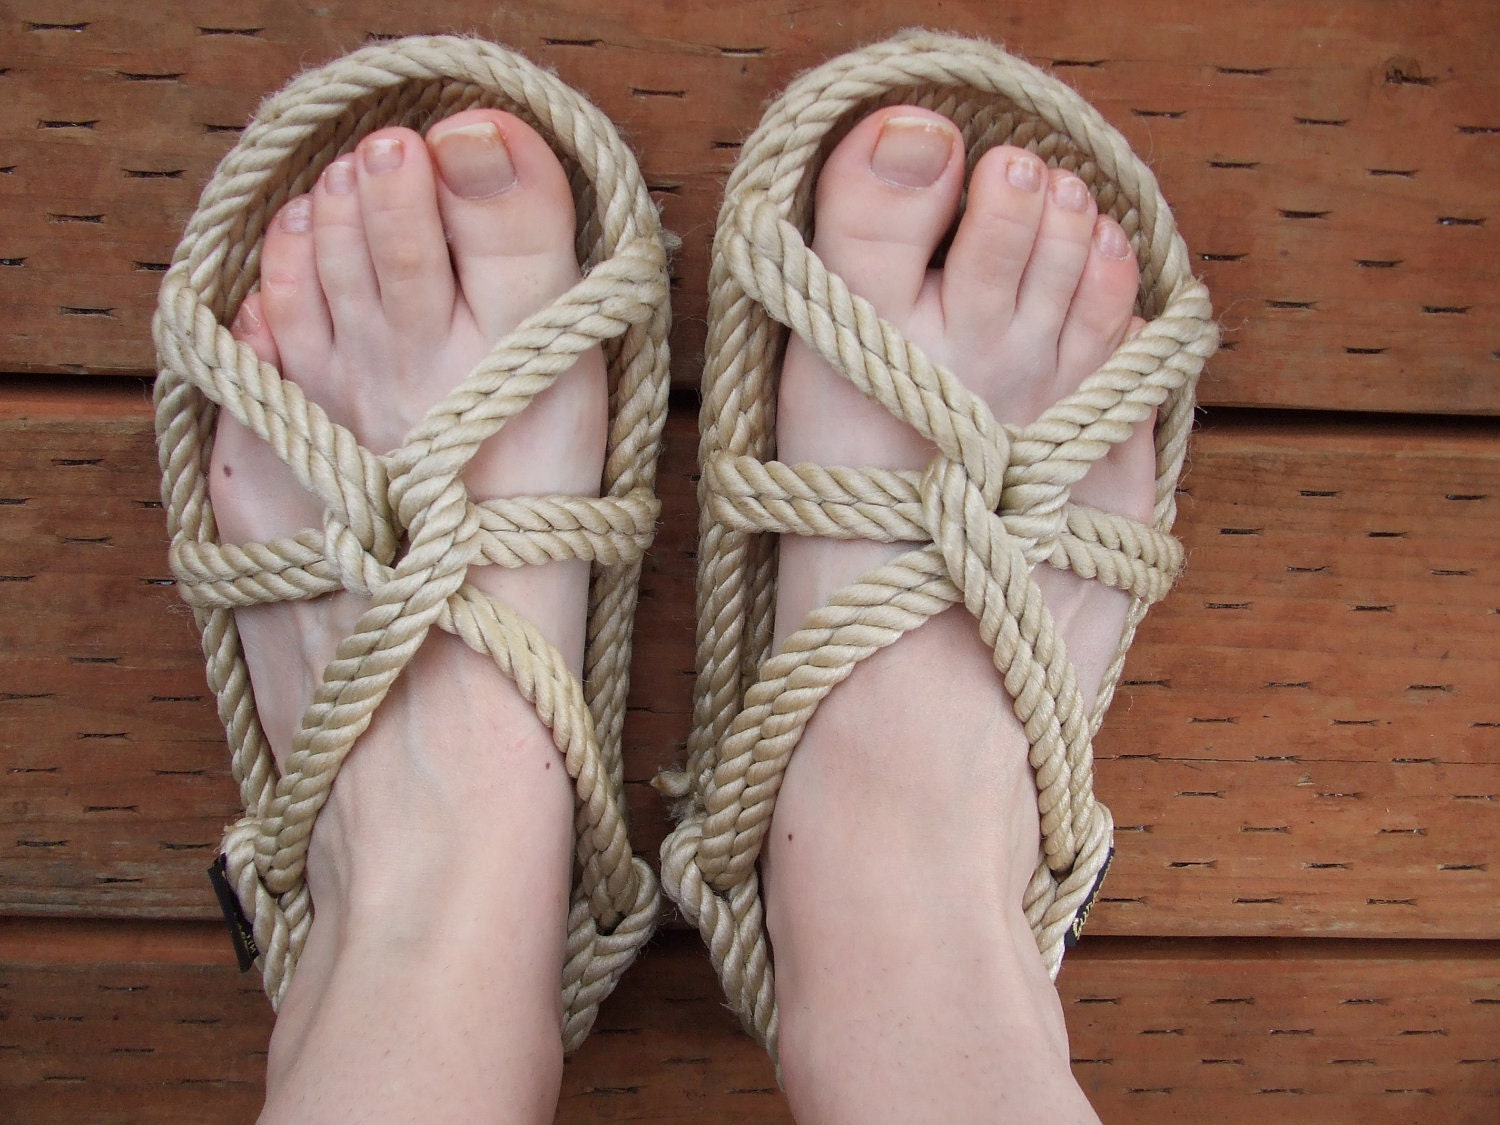 Unique One of a Kind Rope Sandals by Love4Retro on Etsy